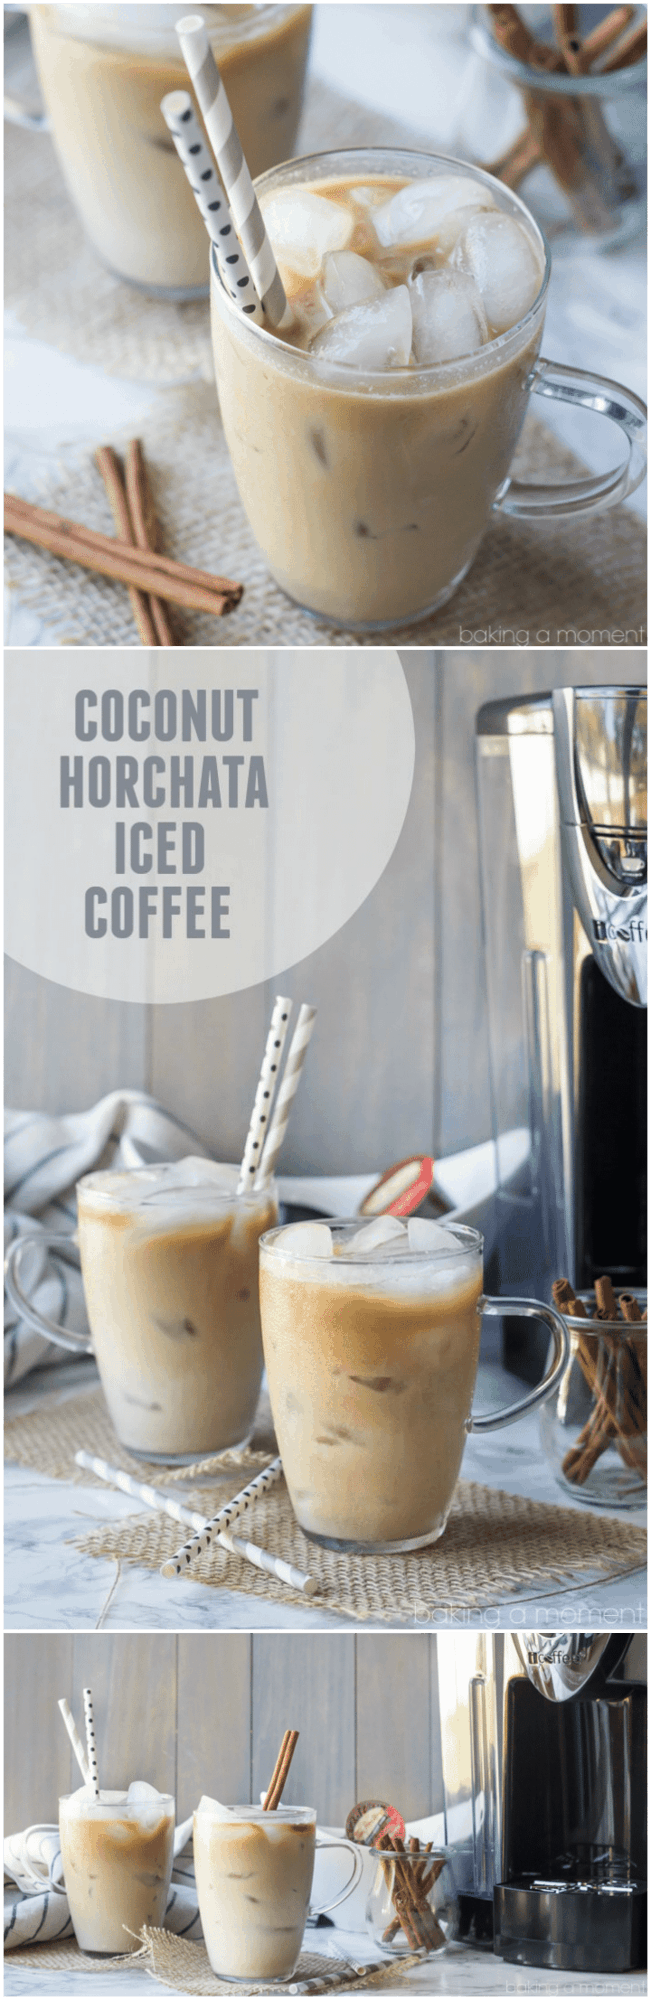 Coconut Horchata Iced Coffee: This iced coffee is so creamy I could hardly believe it was dairy-free.  Loved those hints of coconut, almond, and cinnamon too! 